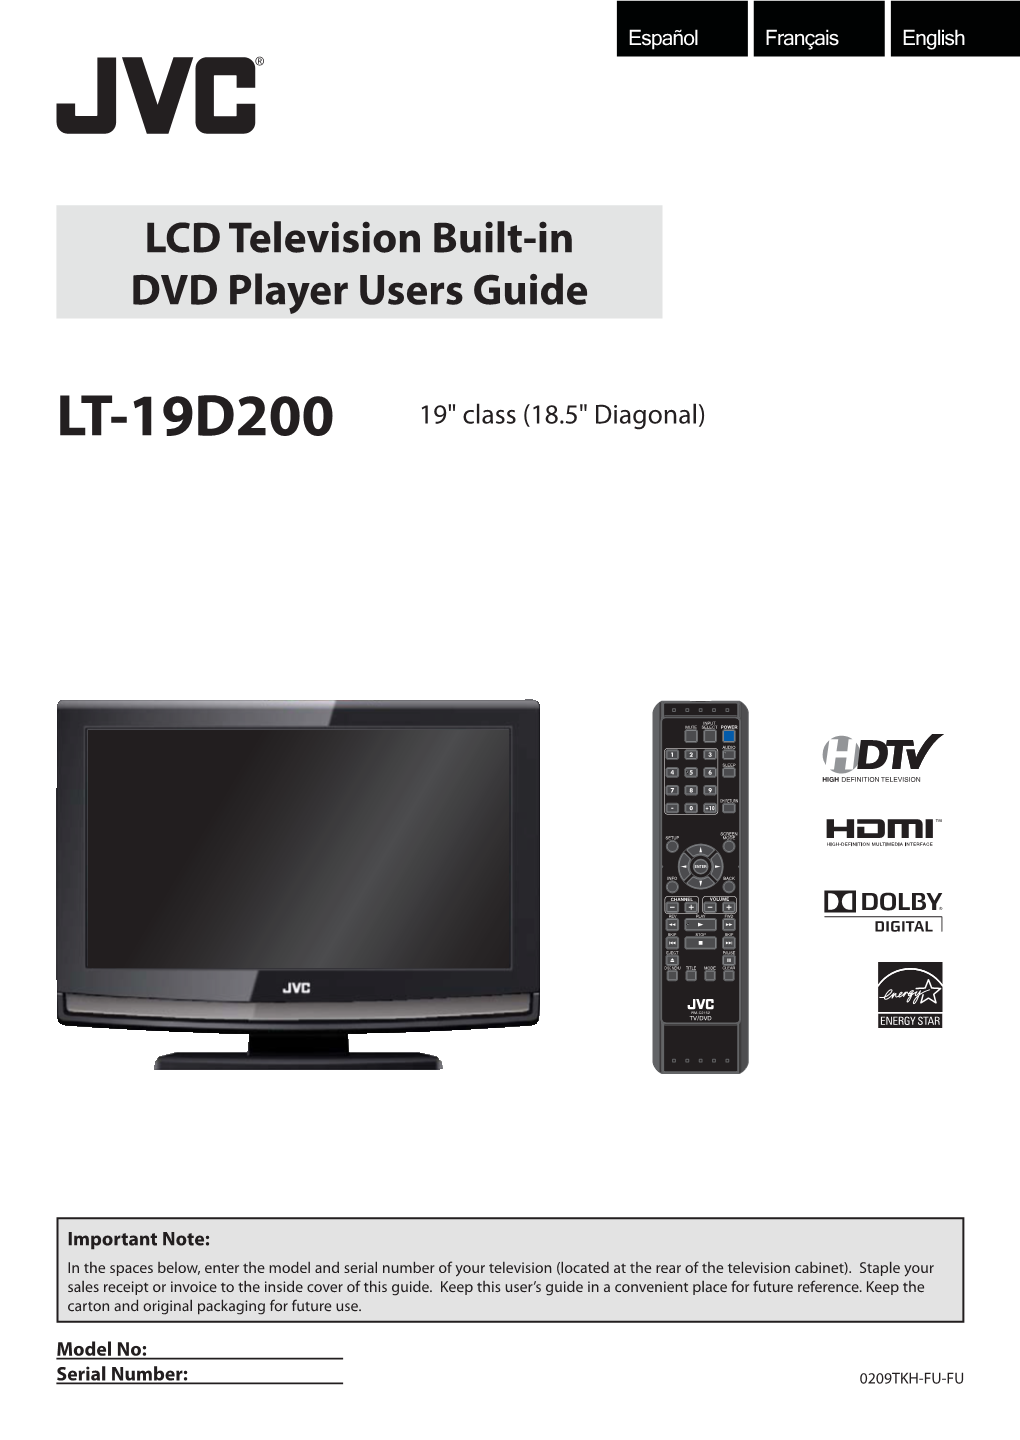 LCD Television Built-In DVD Player Users Guide